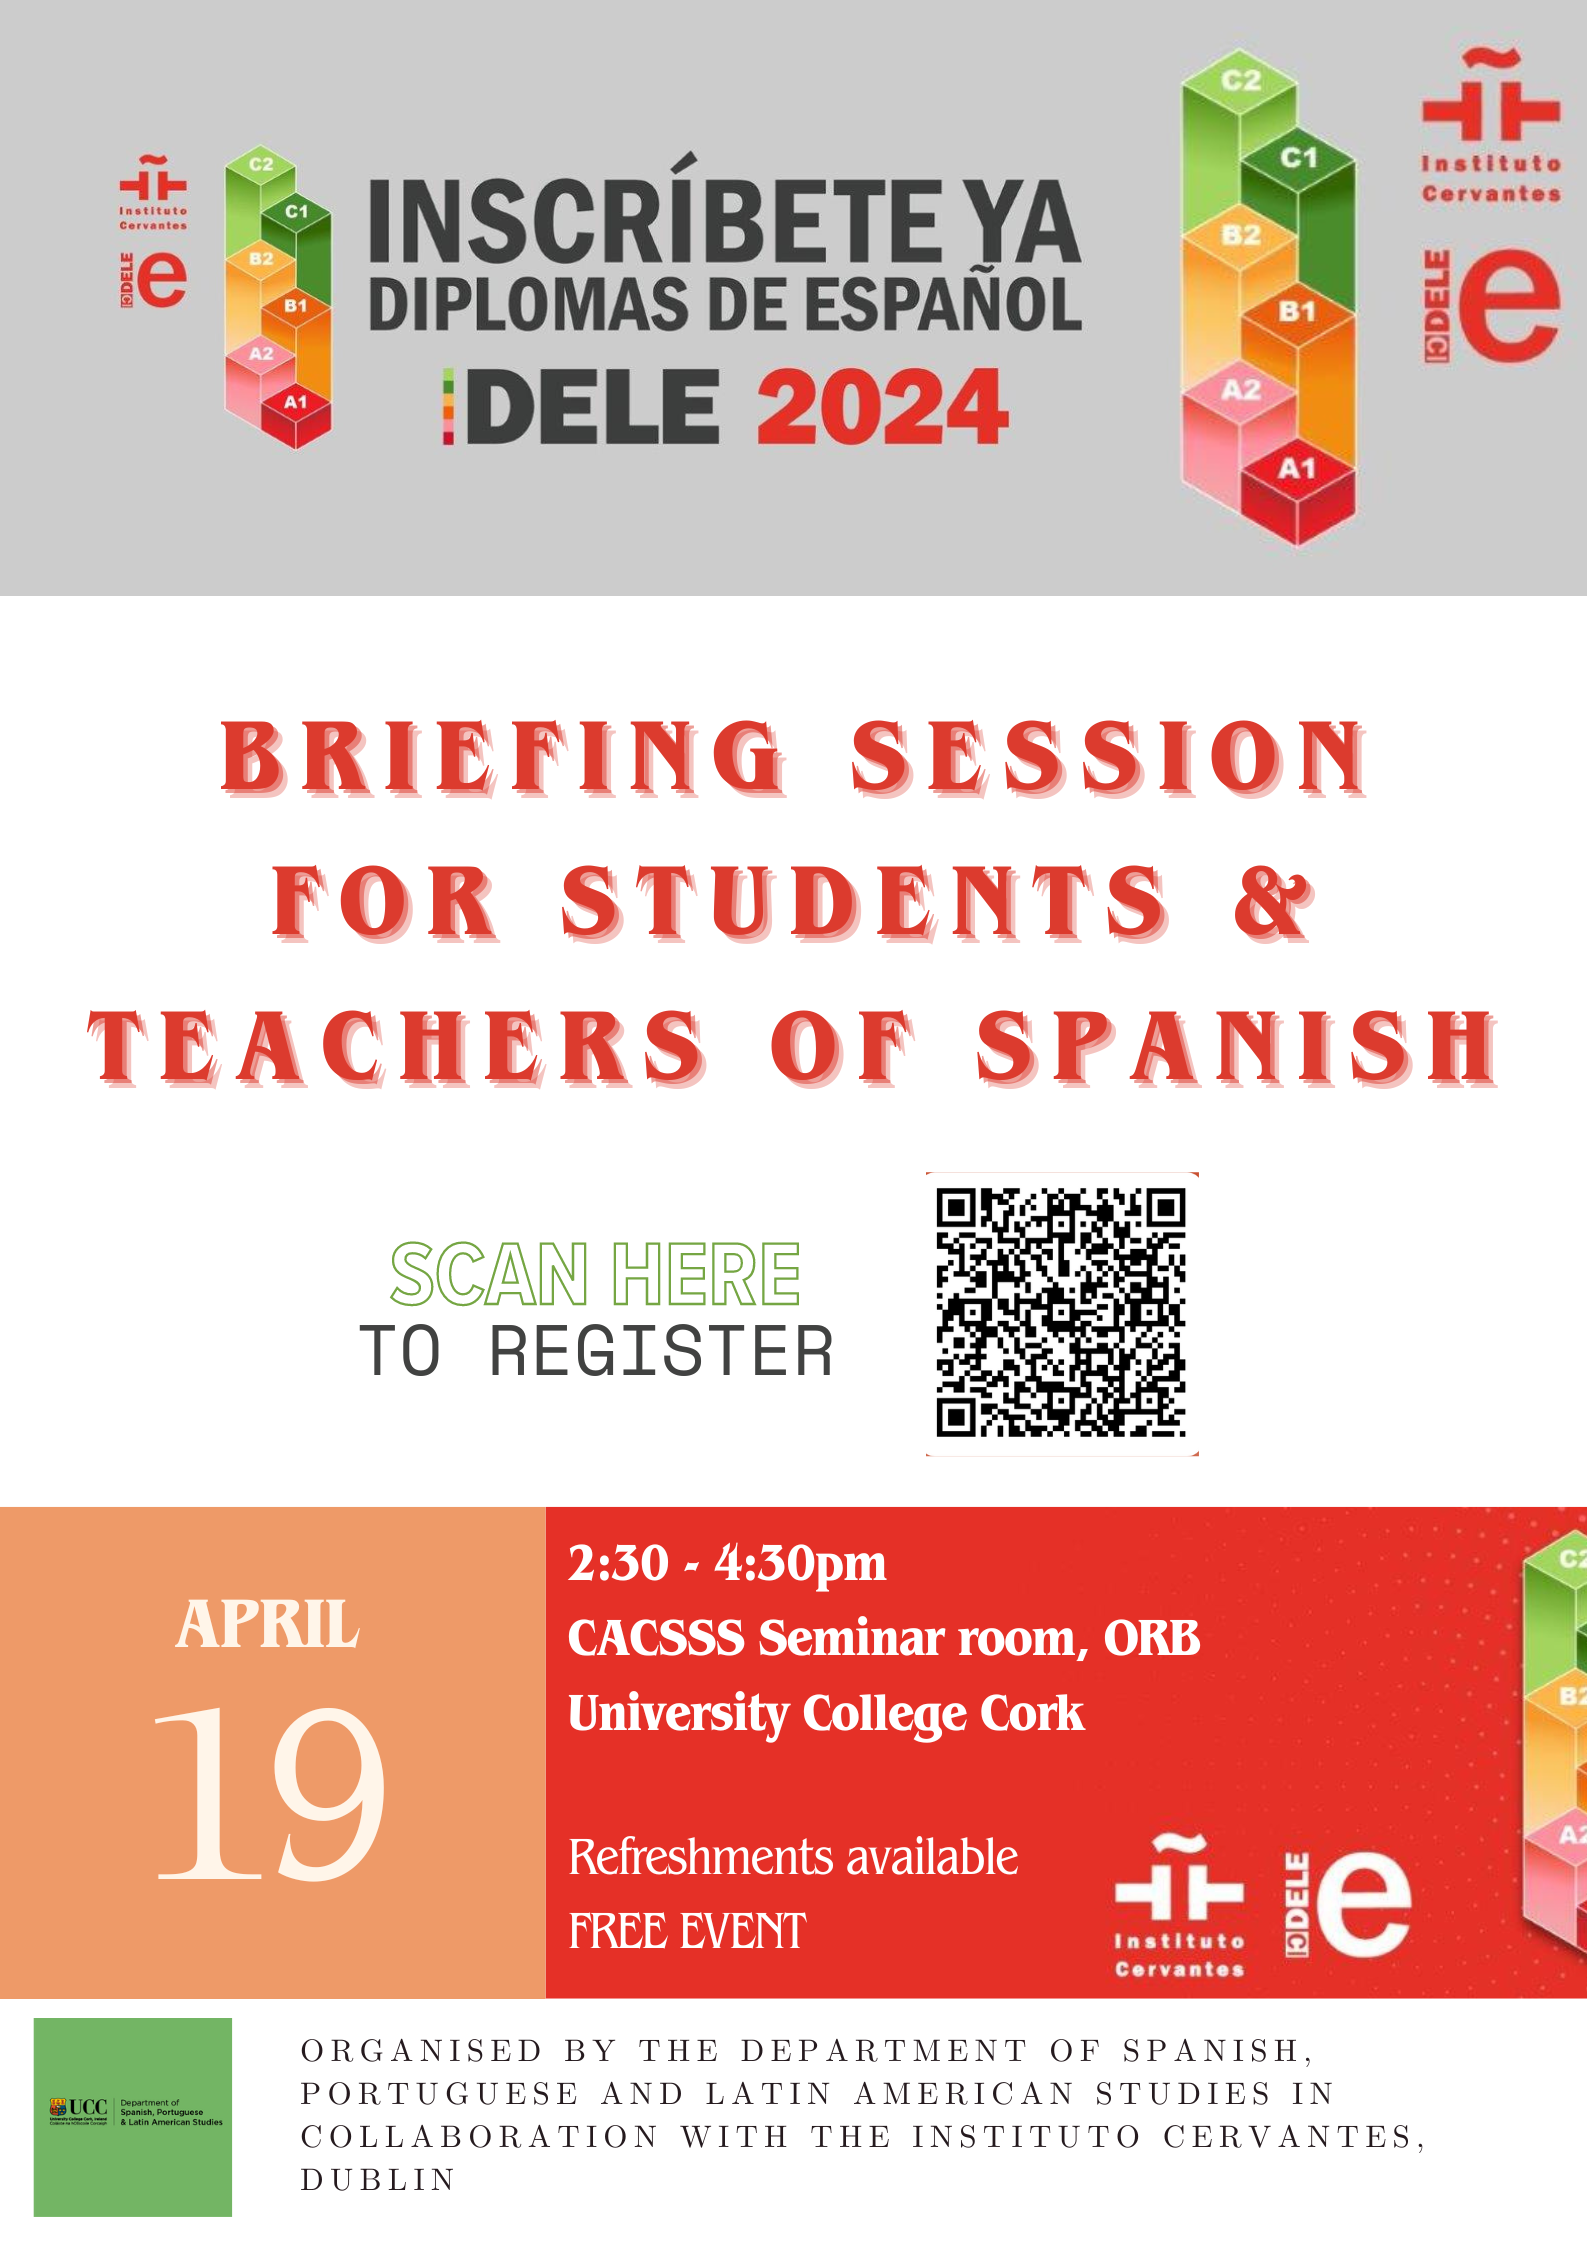 We are delighted to welcome the Instituto Cervantes for a briefing session on their activities, focusing on the DELE Exam